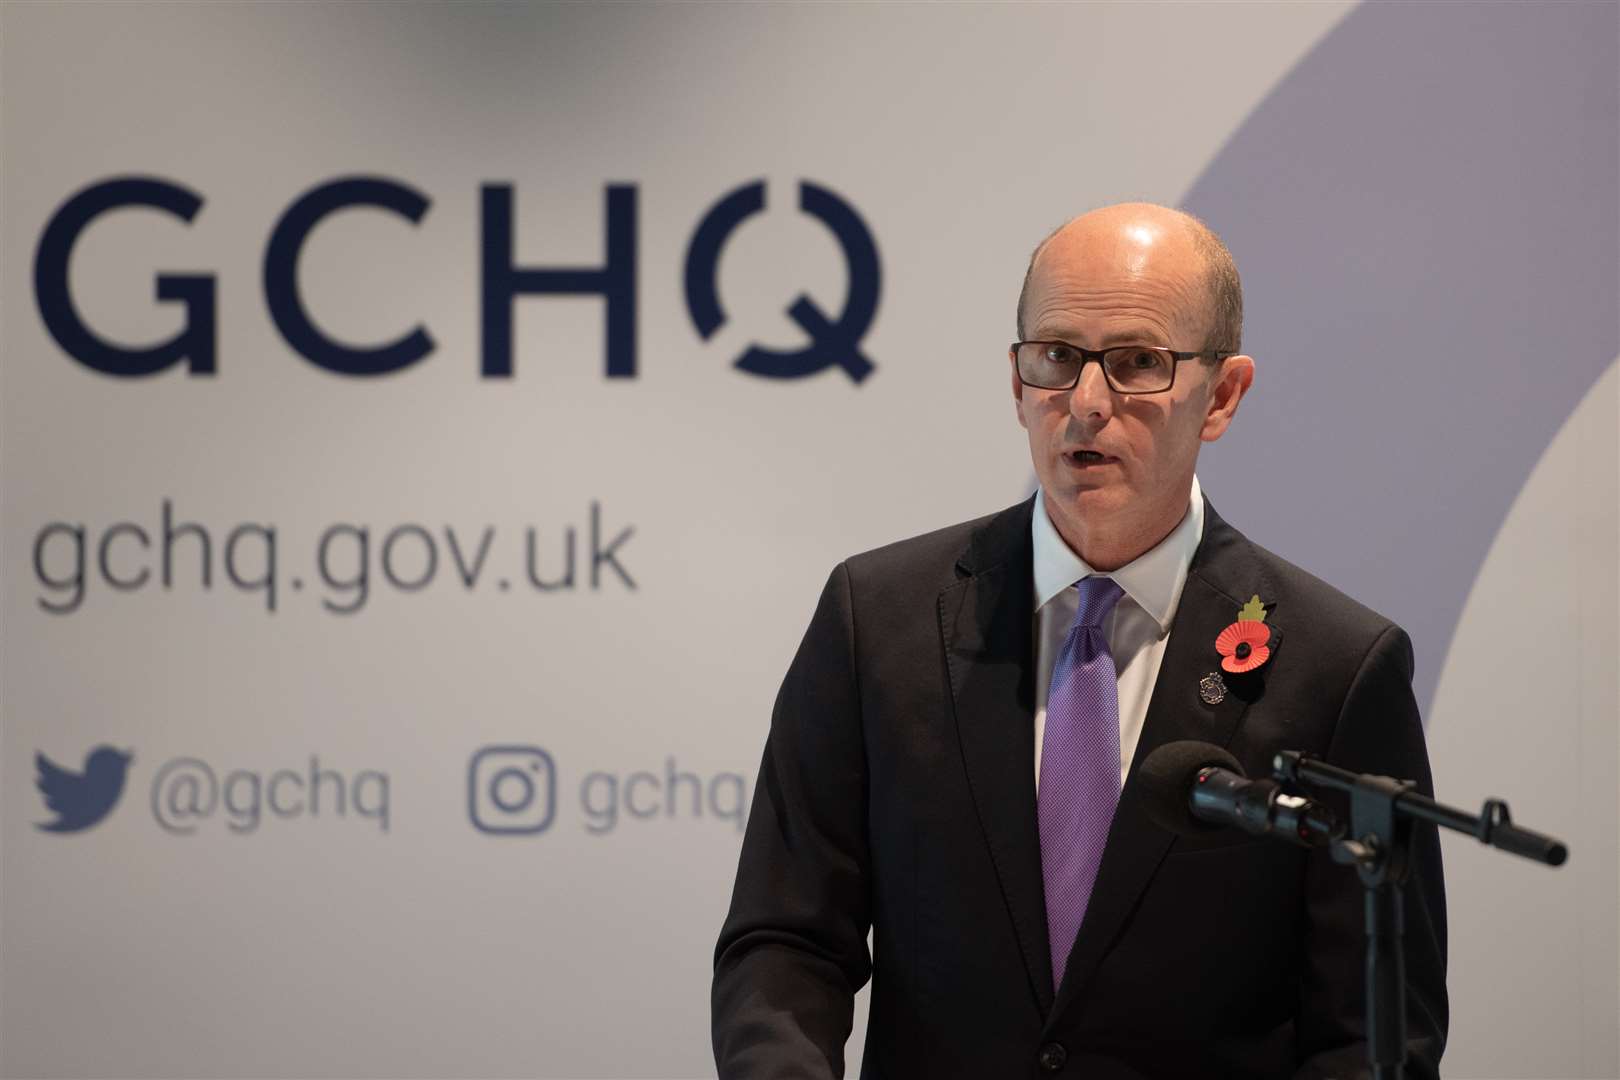 GCHQ director Jeremy Fleming has urged people to be vigilant online during the pandemic (Joe Giddens/PA)